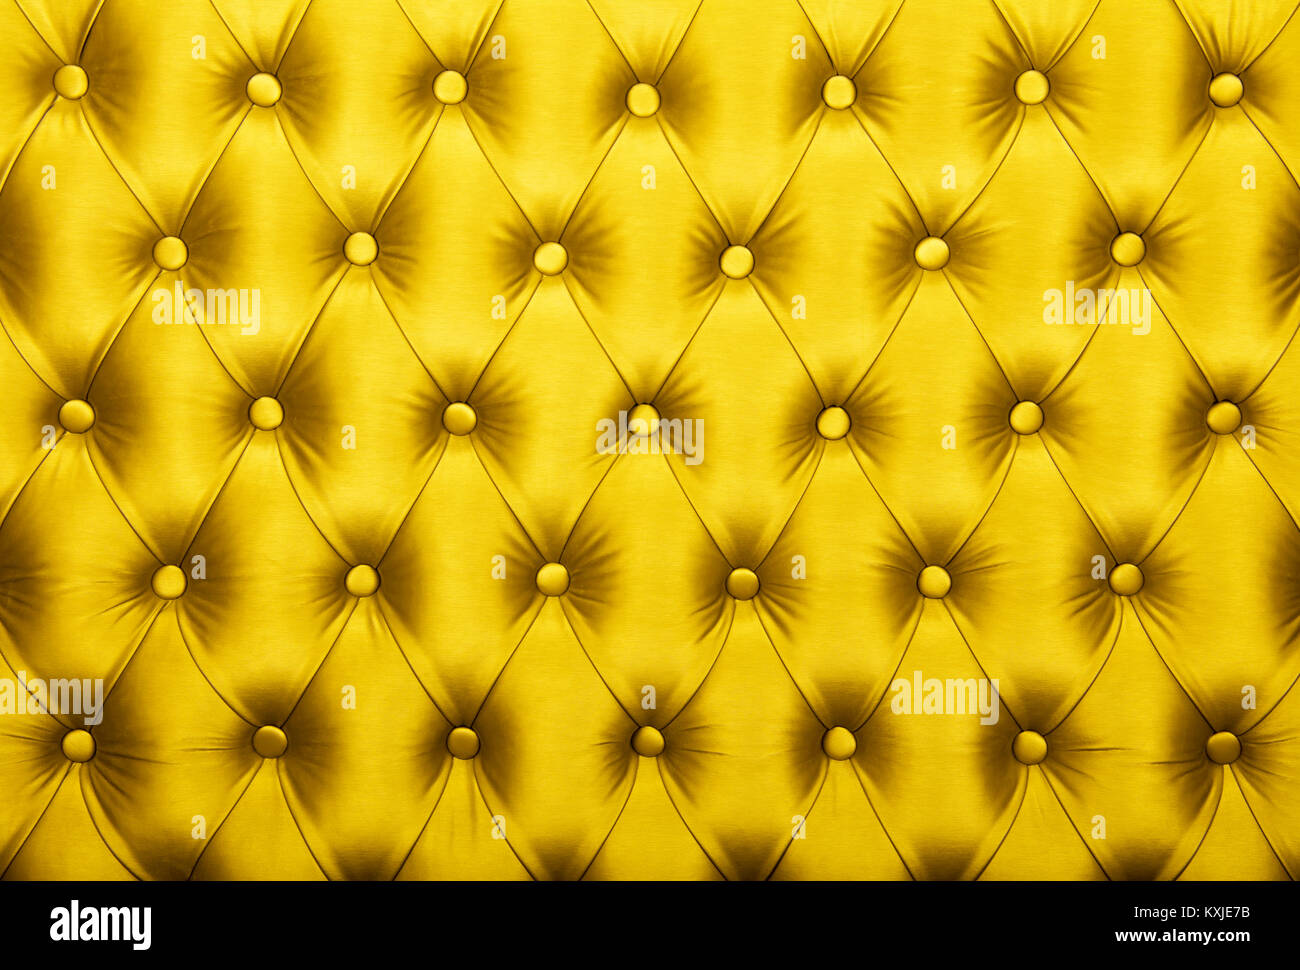 Yellow vivid capitone textile background, retro Chesterfield style checkered soft tufted fabric furniture diamond pattern decoration with buttons, clo Stock Photo